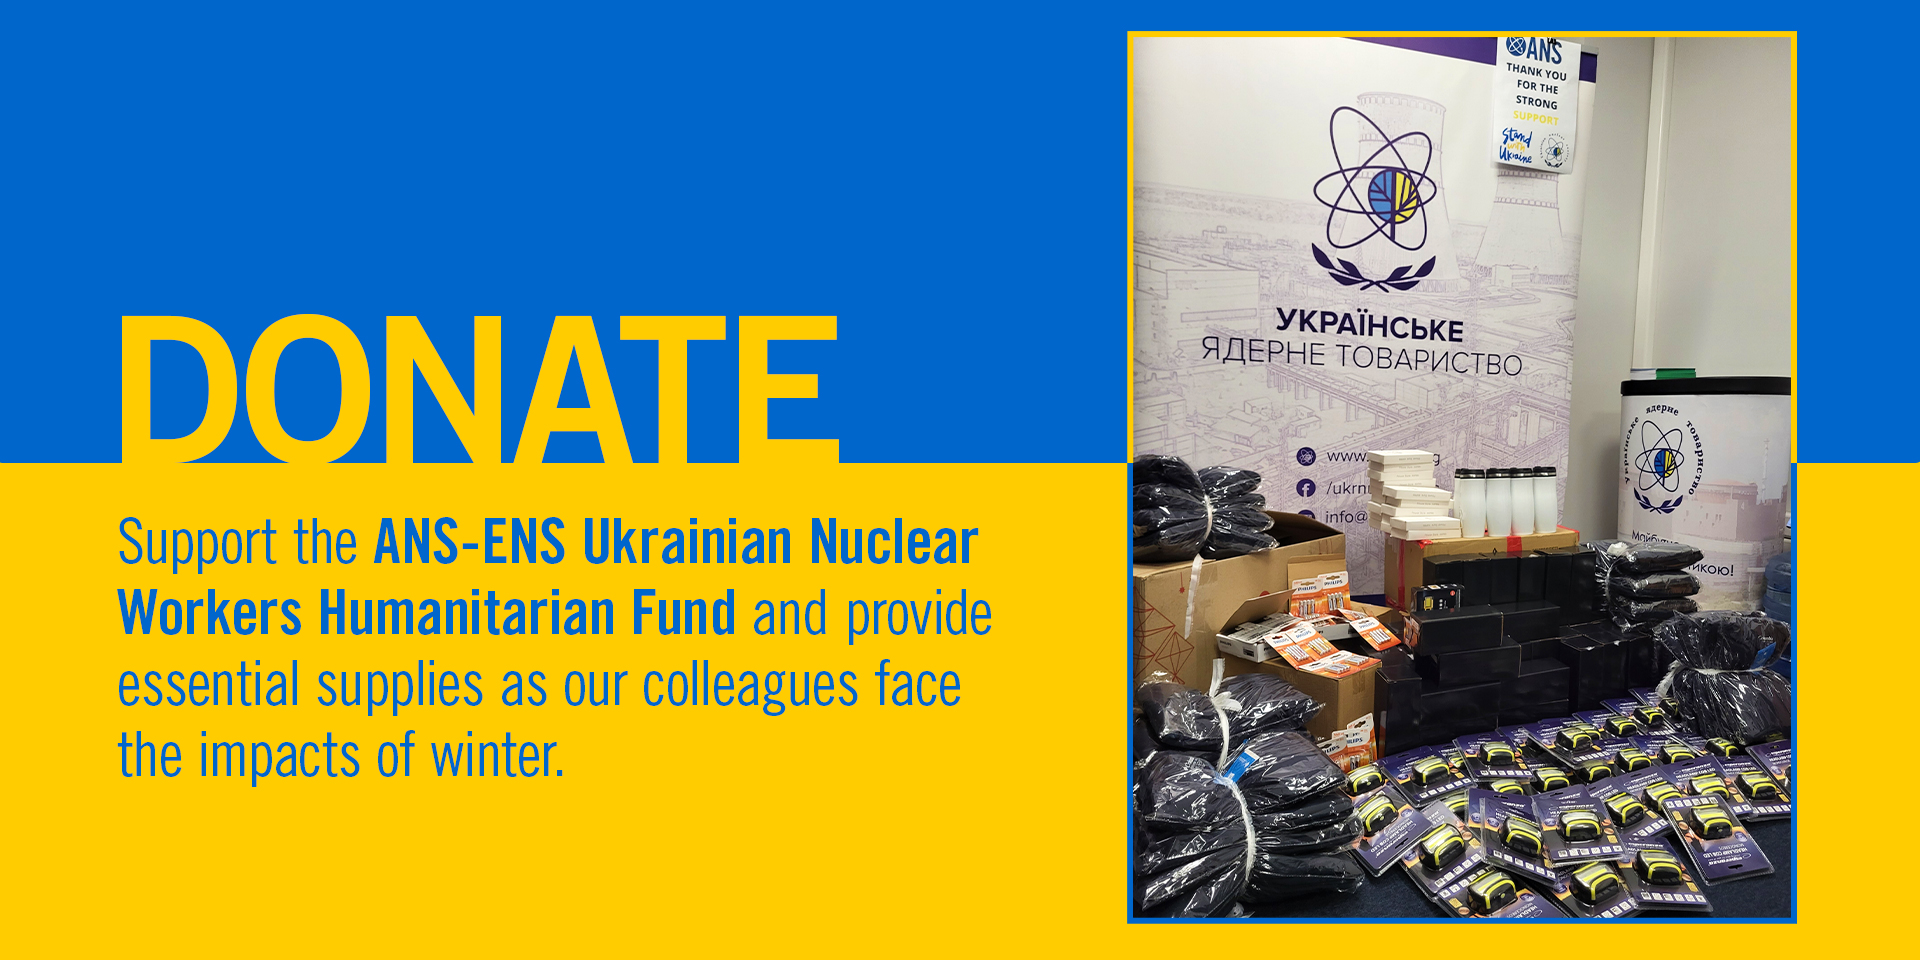 All donations go directly to the Ukraine Nuclear Society